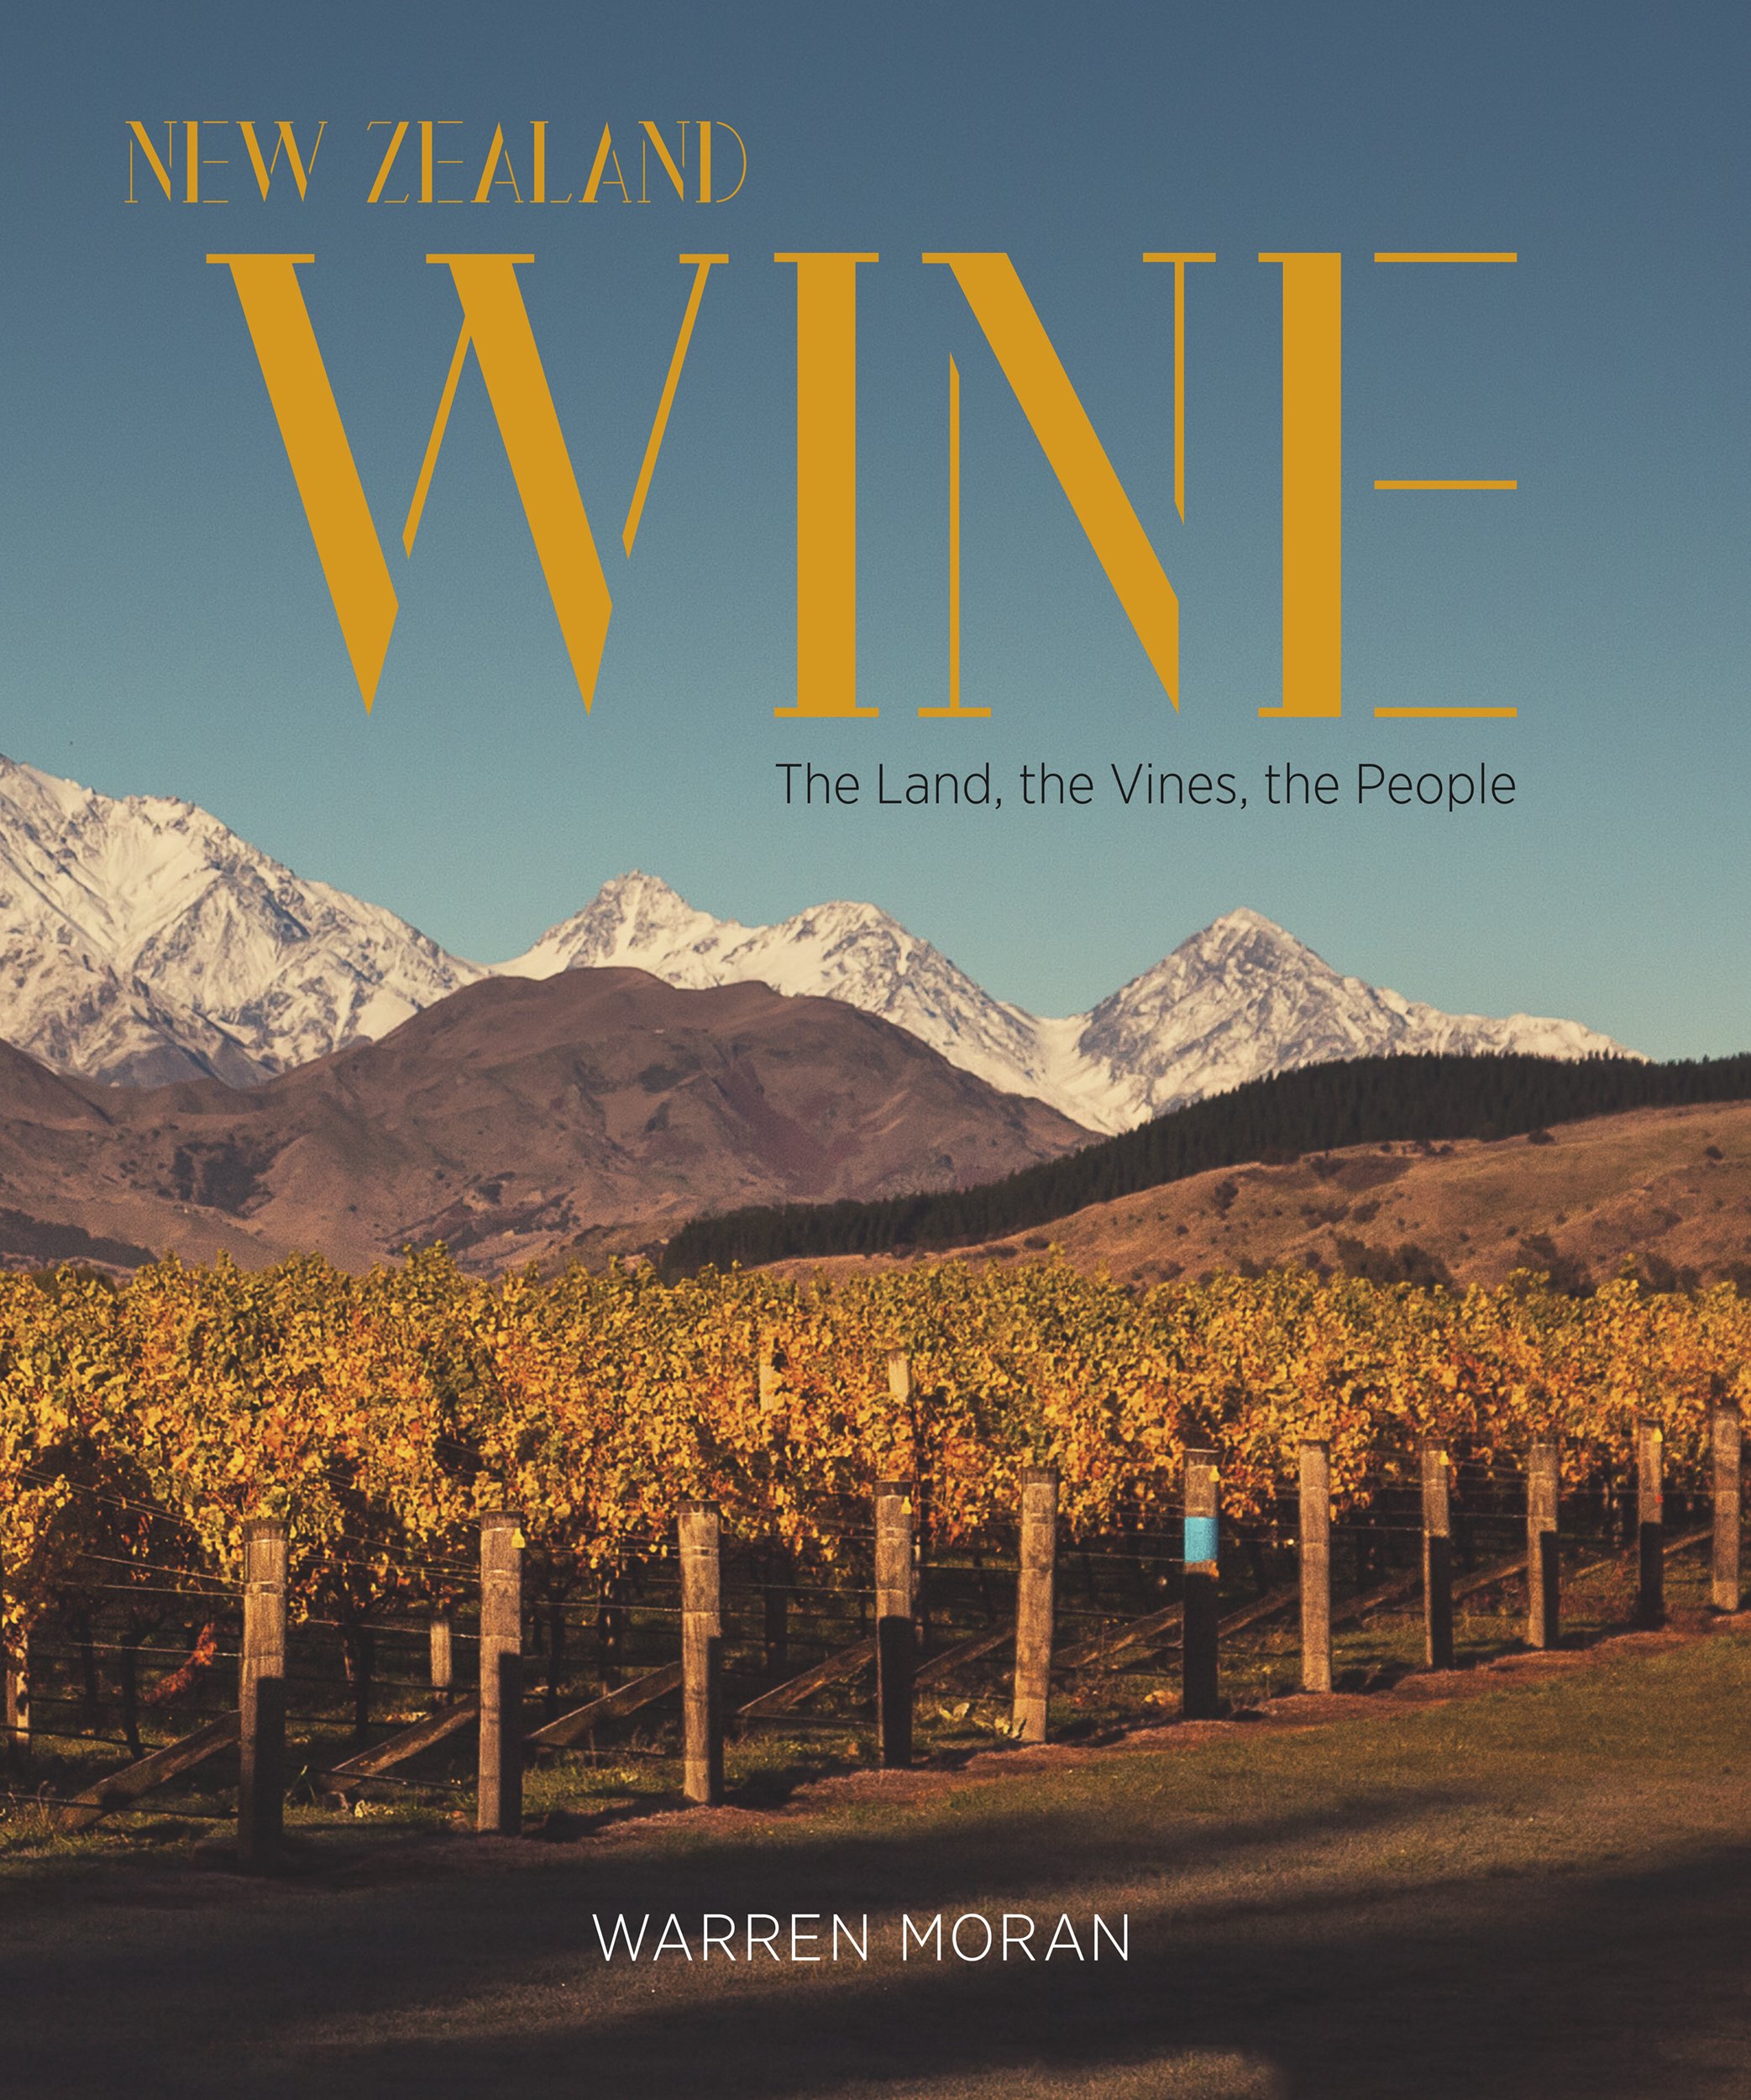 New Zealand Wine: The Land, The Vines, The People